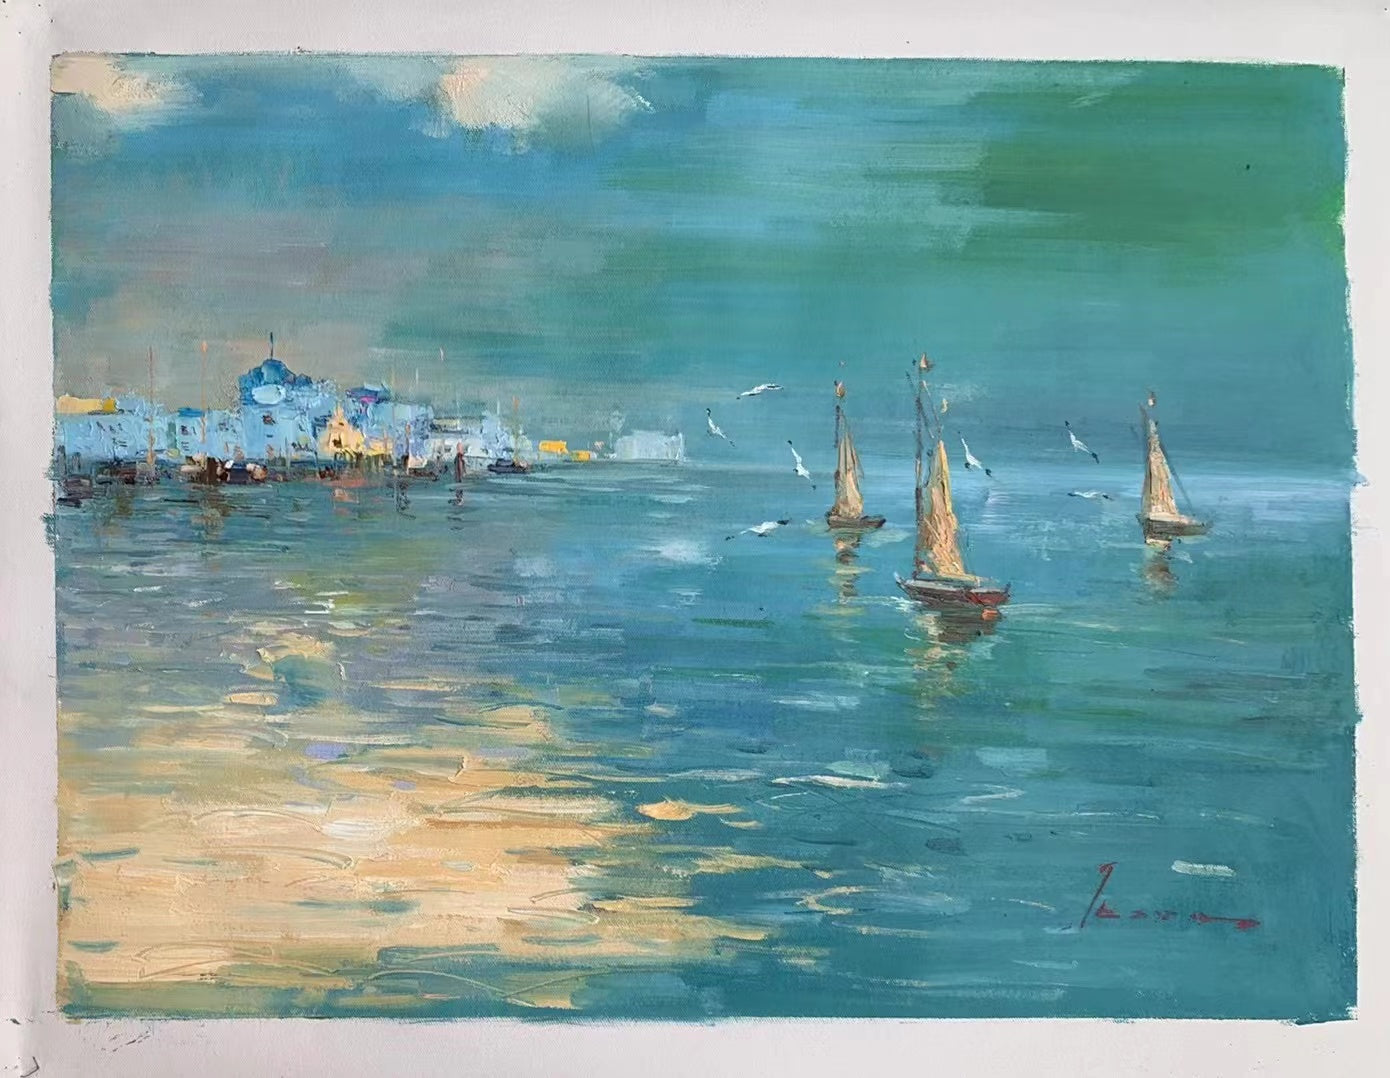 Abstract Sea Landscape Painting with Yachts: Wall Art Australia